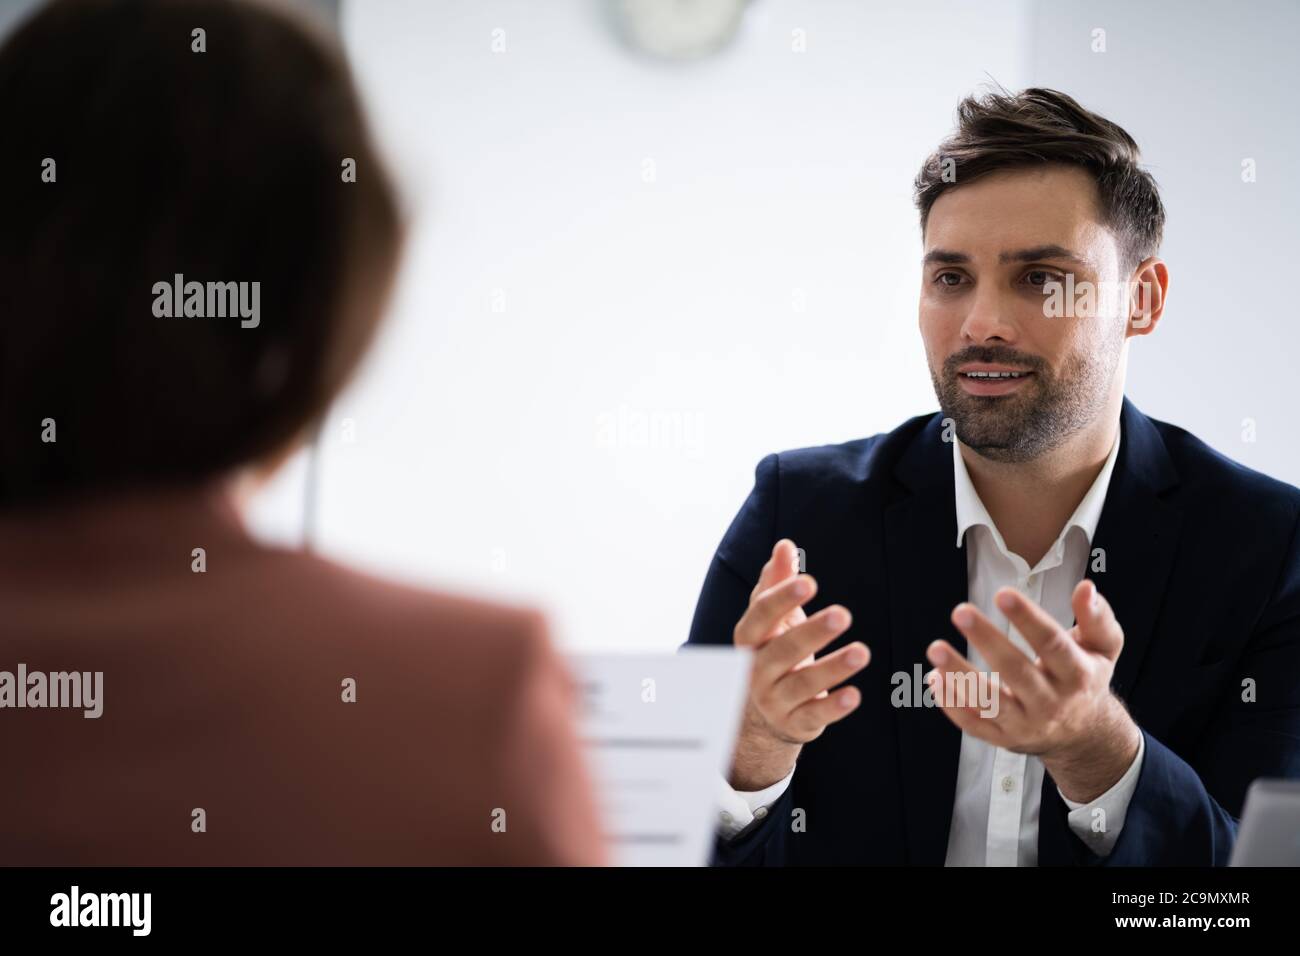 Job Interview. Business Manager Talking To Recruiter In Meeting Stock Photo